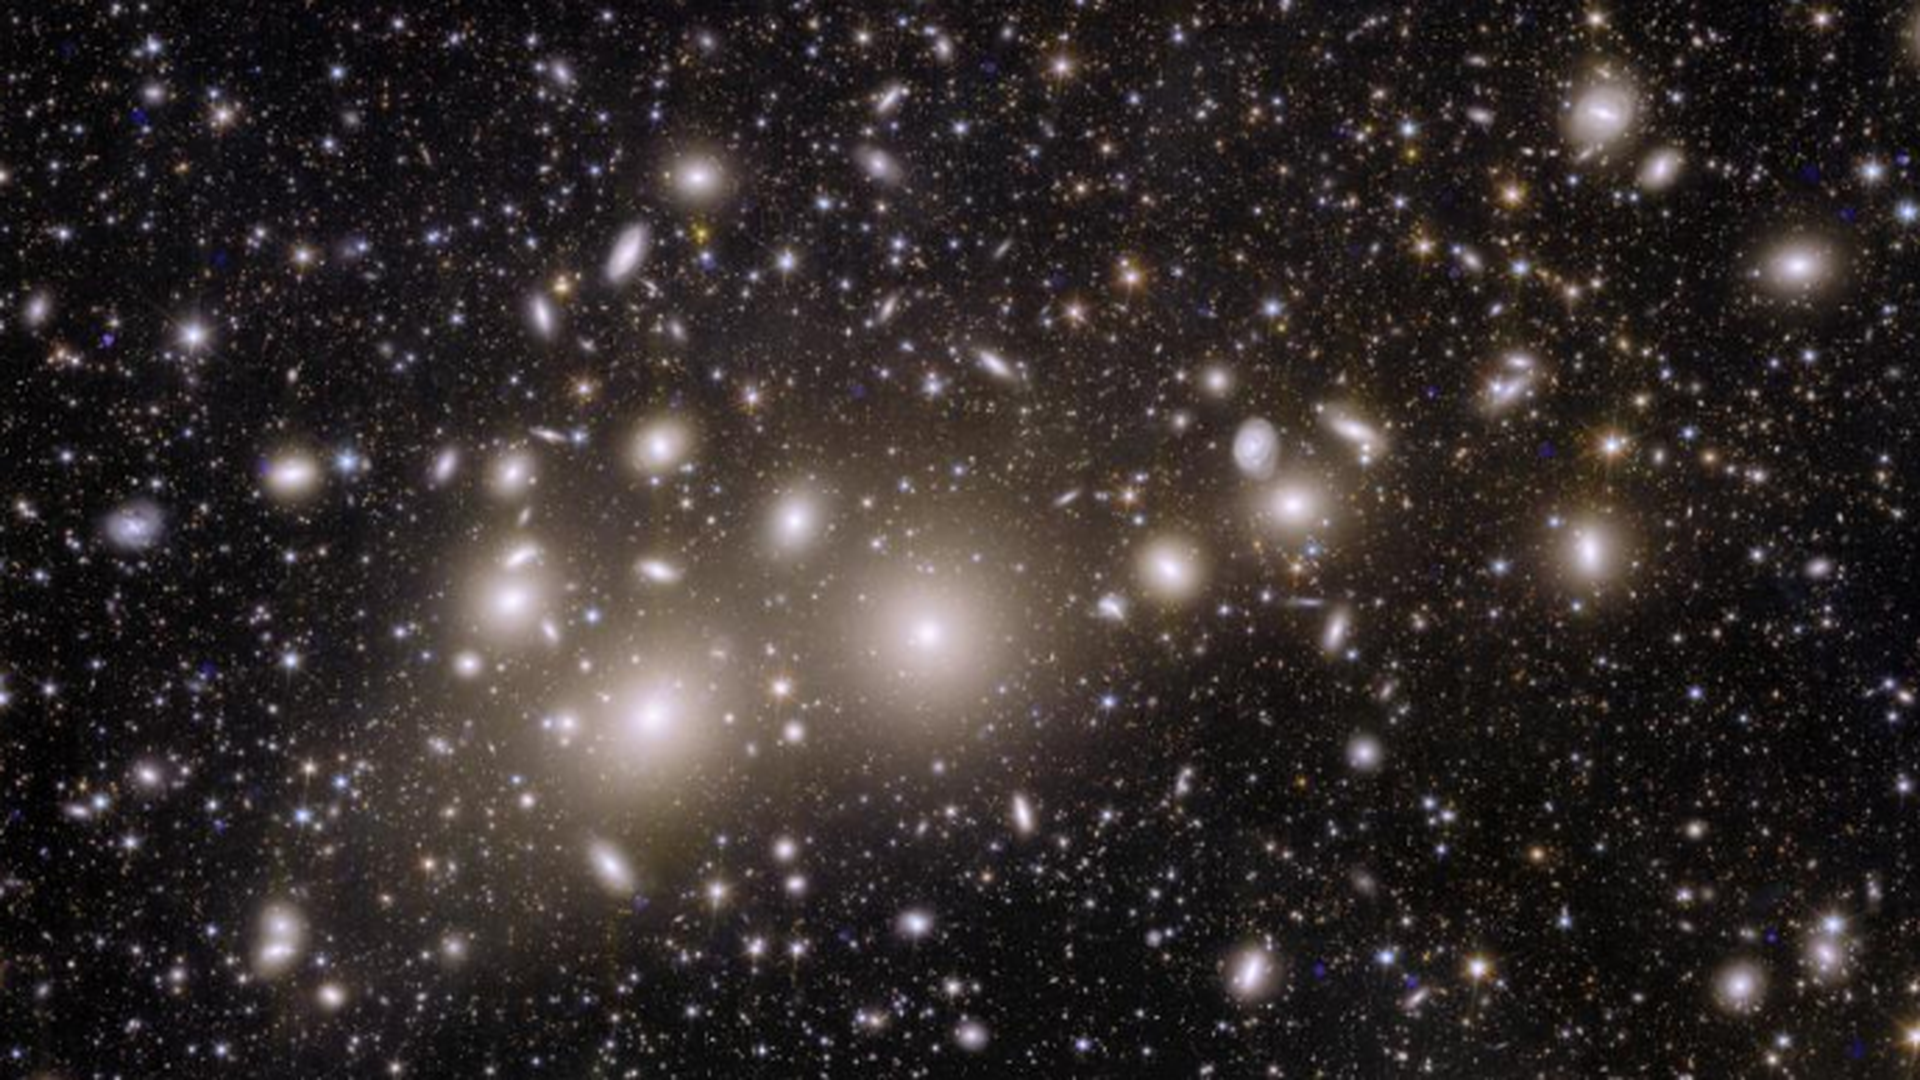 Am image taken by Euclid showing 1,000 galaxies belonging to the Perseus Cluster and more than 100,000 additional galaxies further away in the background.